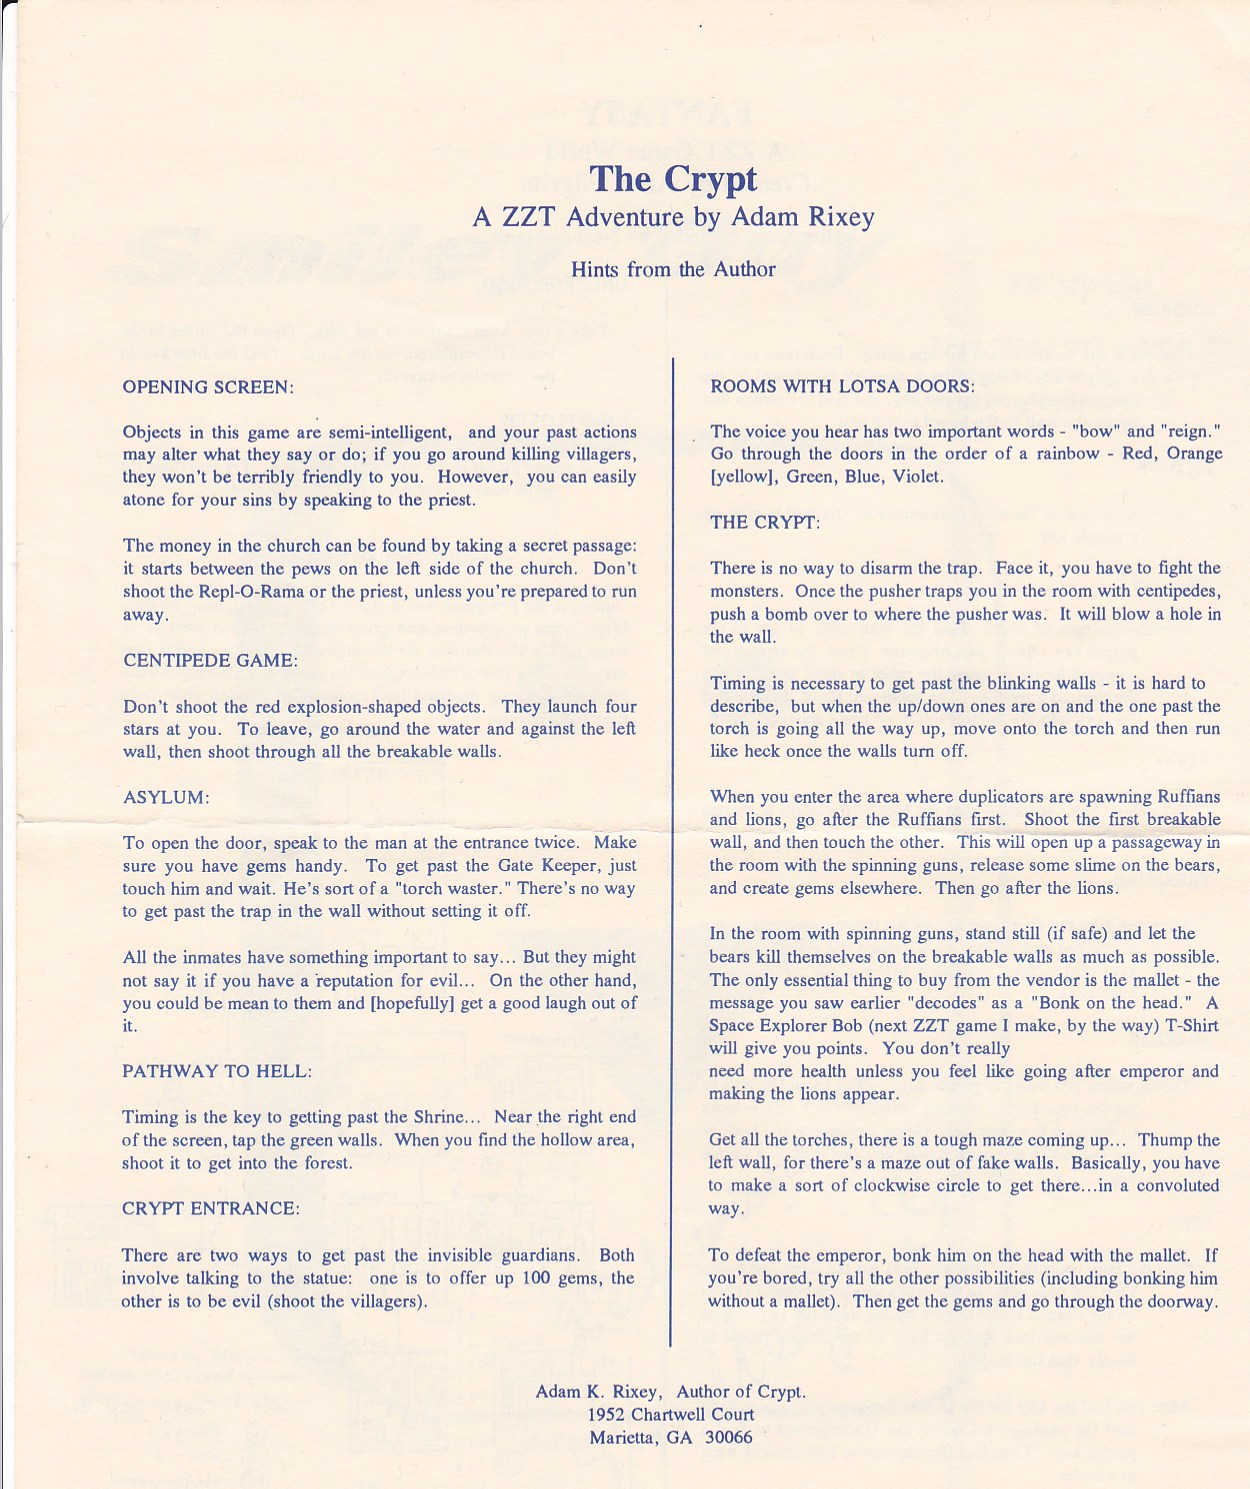 The Crypt Hint Sheet